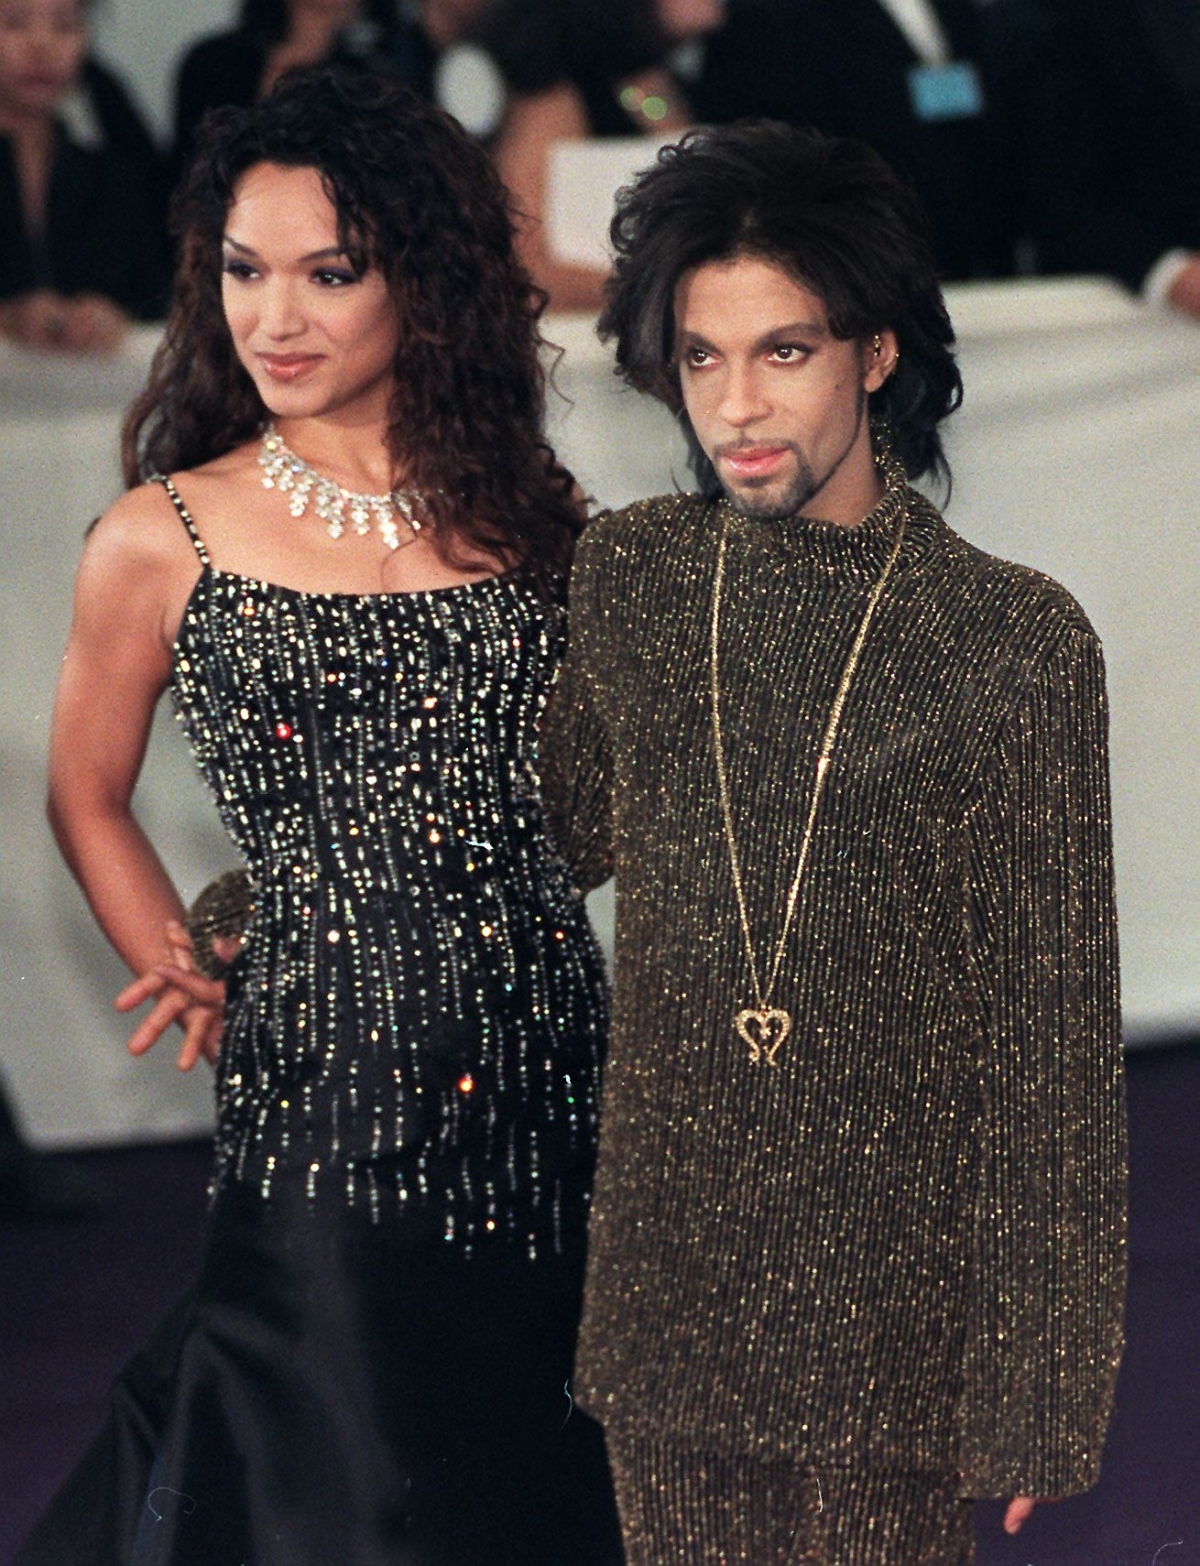 Prince's ex-wife Mayte Garcia on singer's drug use: 'There were